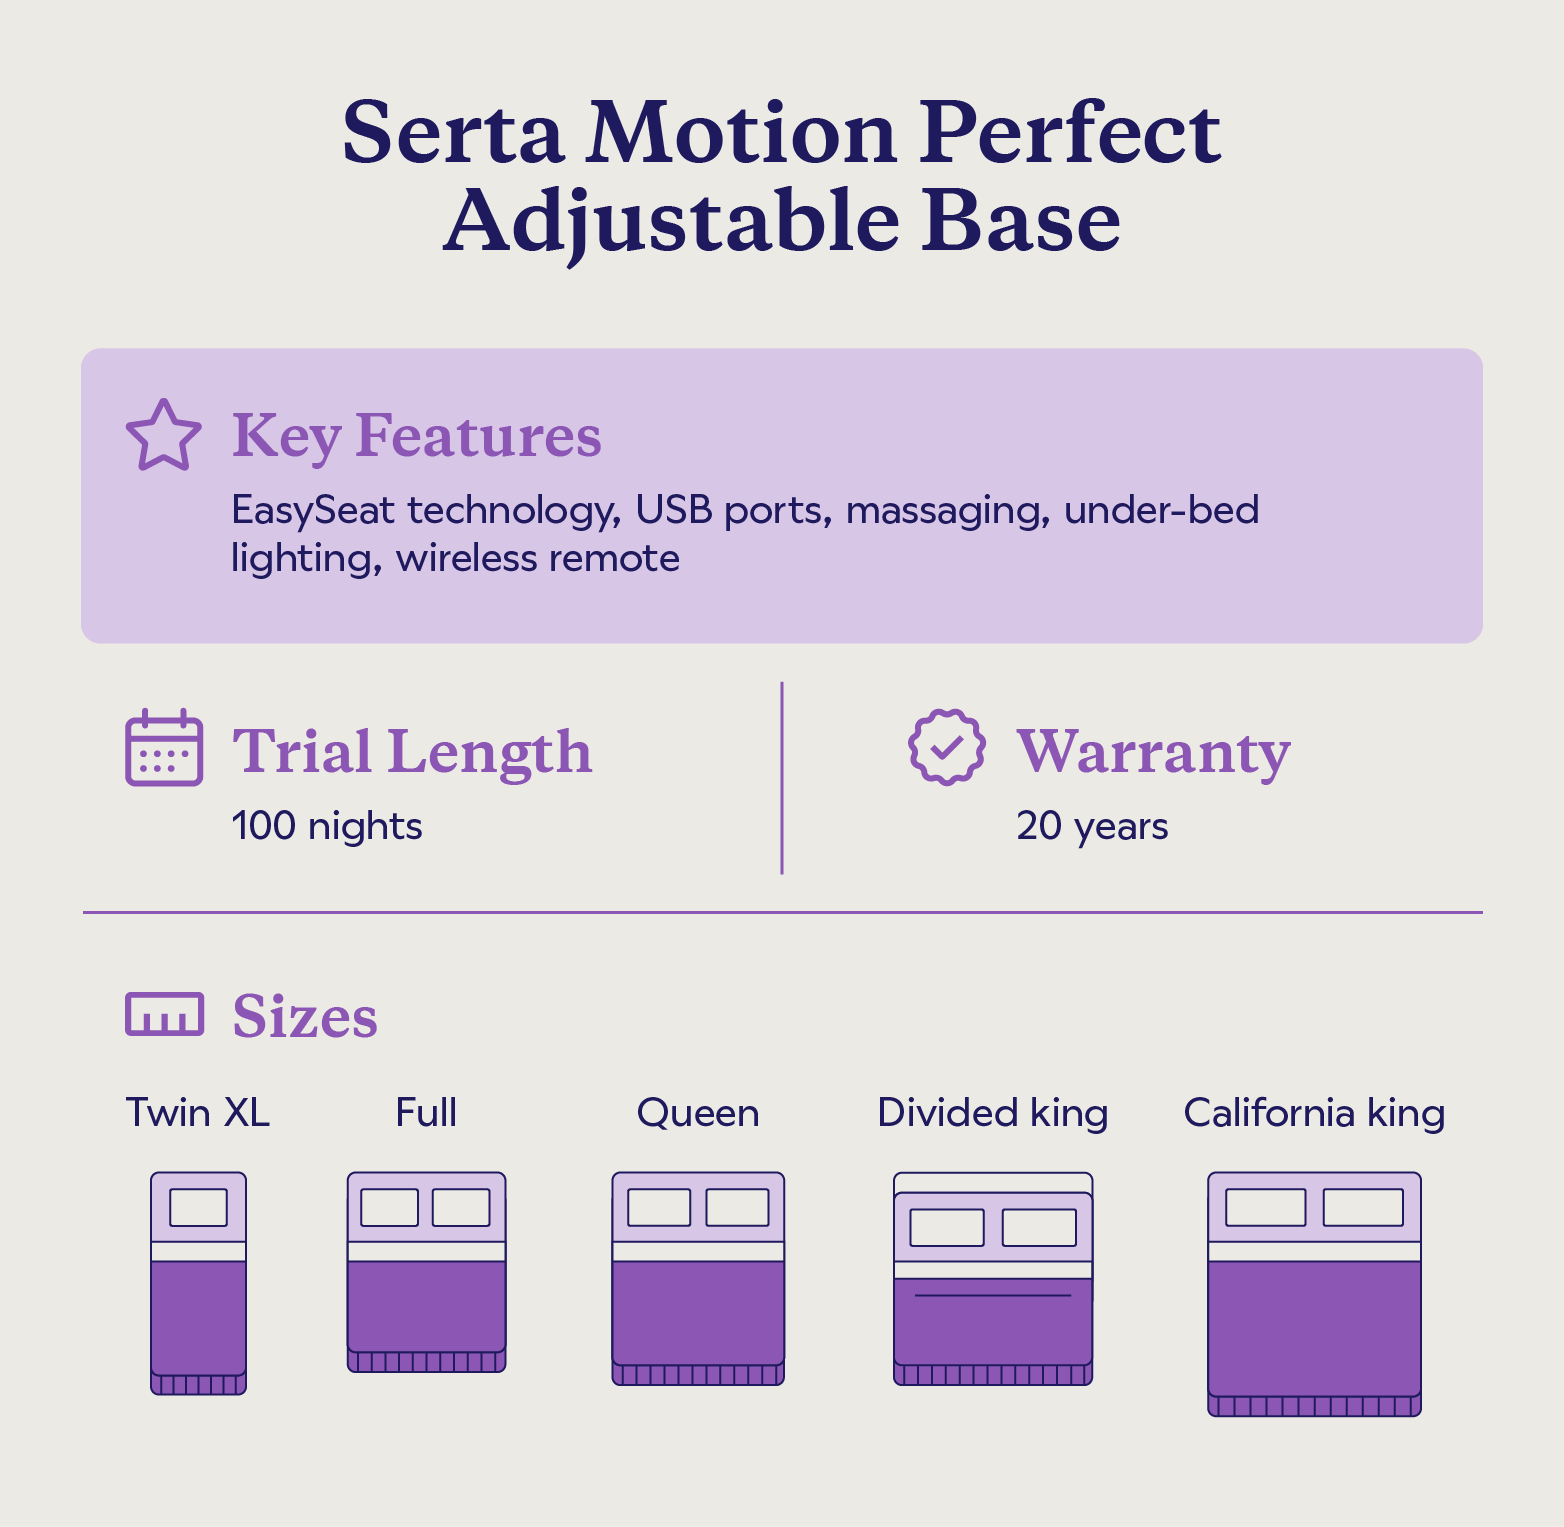 Key features and sizes of the Serta Motion Perfect Adjustable Base.